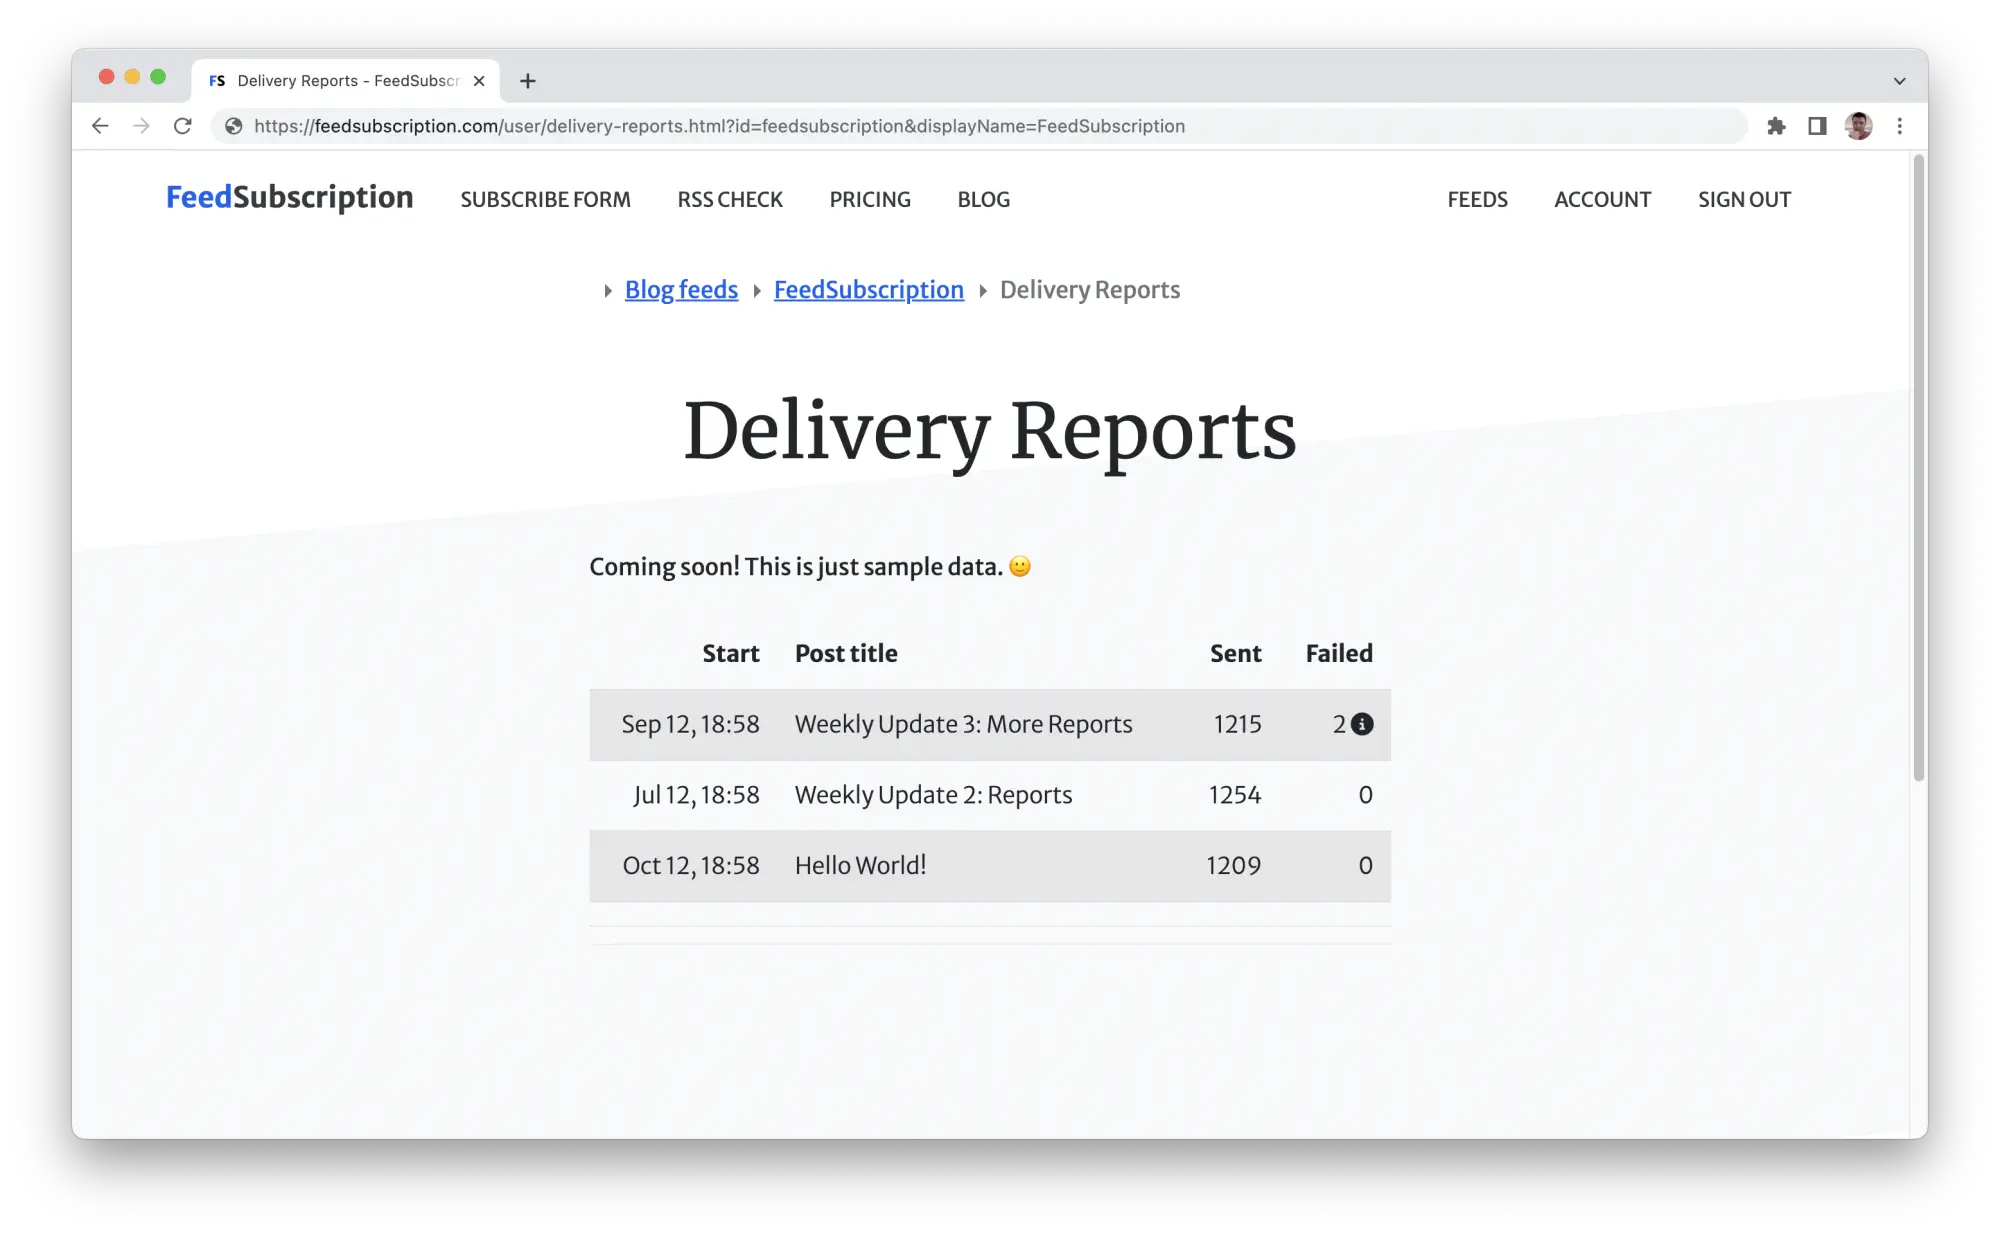 Screenshot of the Delivery Reports page